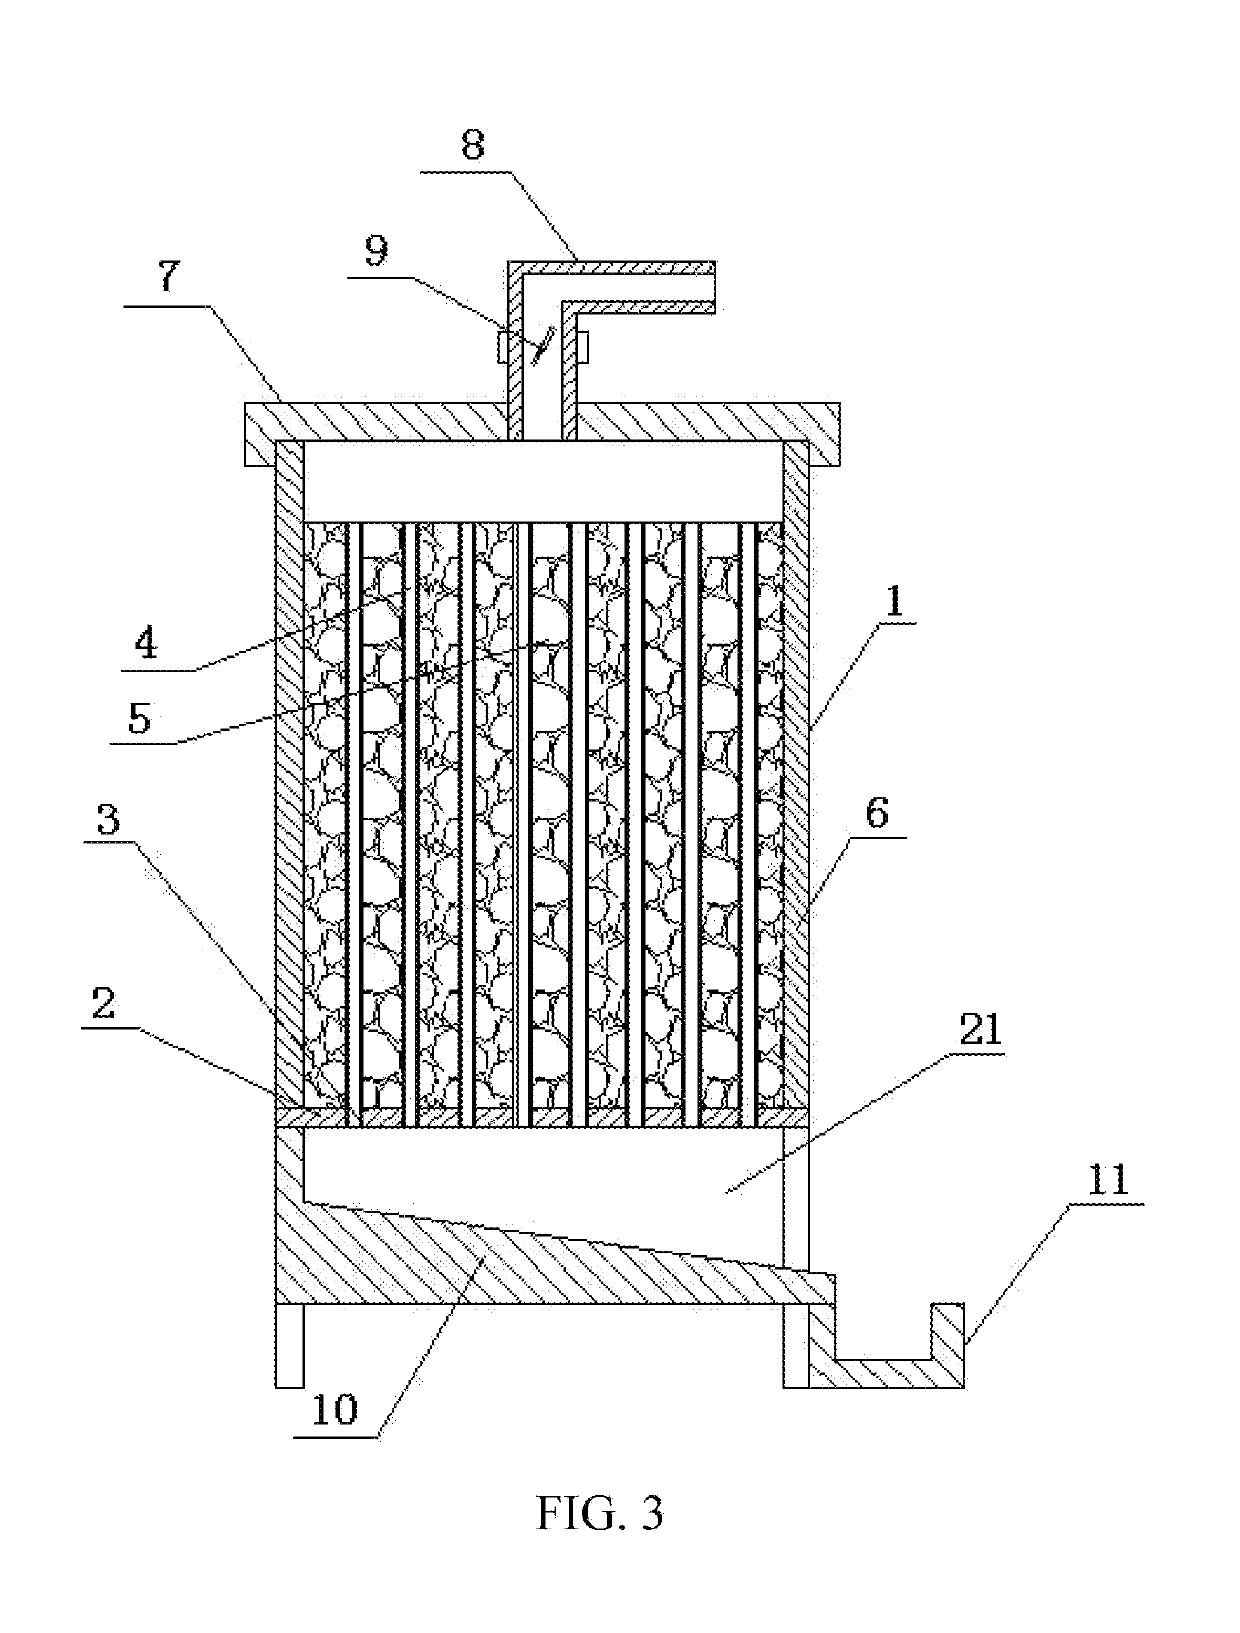 Aerobic microorganism large-size fermentation pile treatment system considering both ventilation and heat preservation and fermentation furnace capable of continuously operating